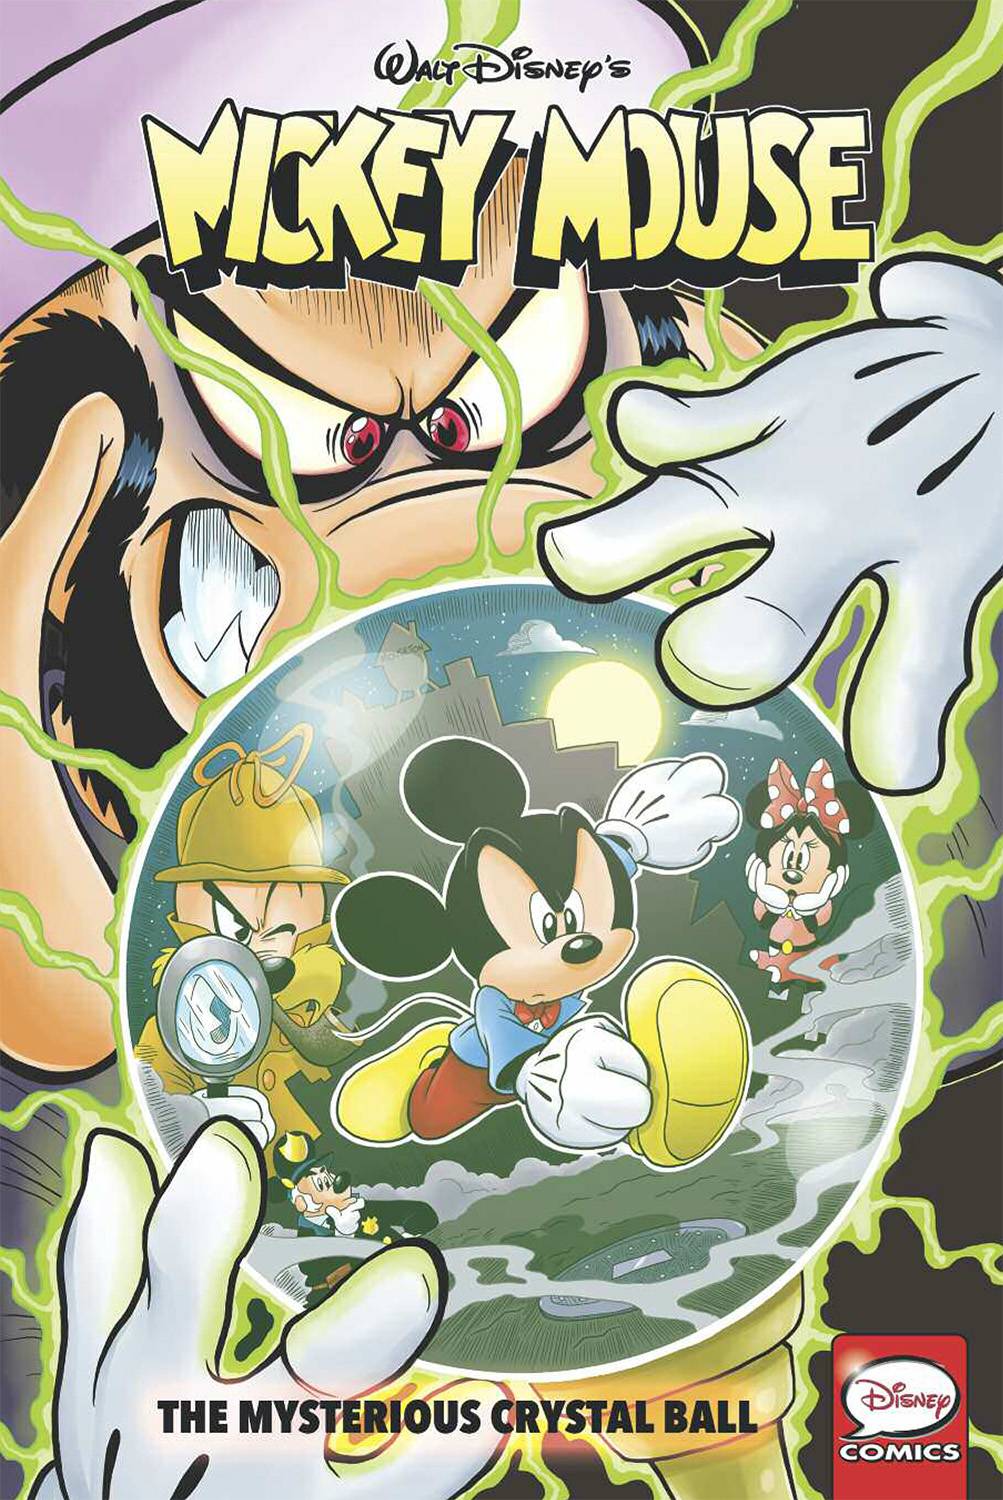 MICKEY MOUSE VOL 01: THE MYSTERIOUS CRYSTAL BALL